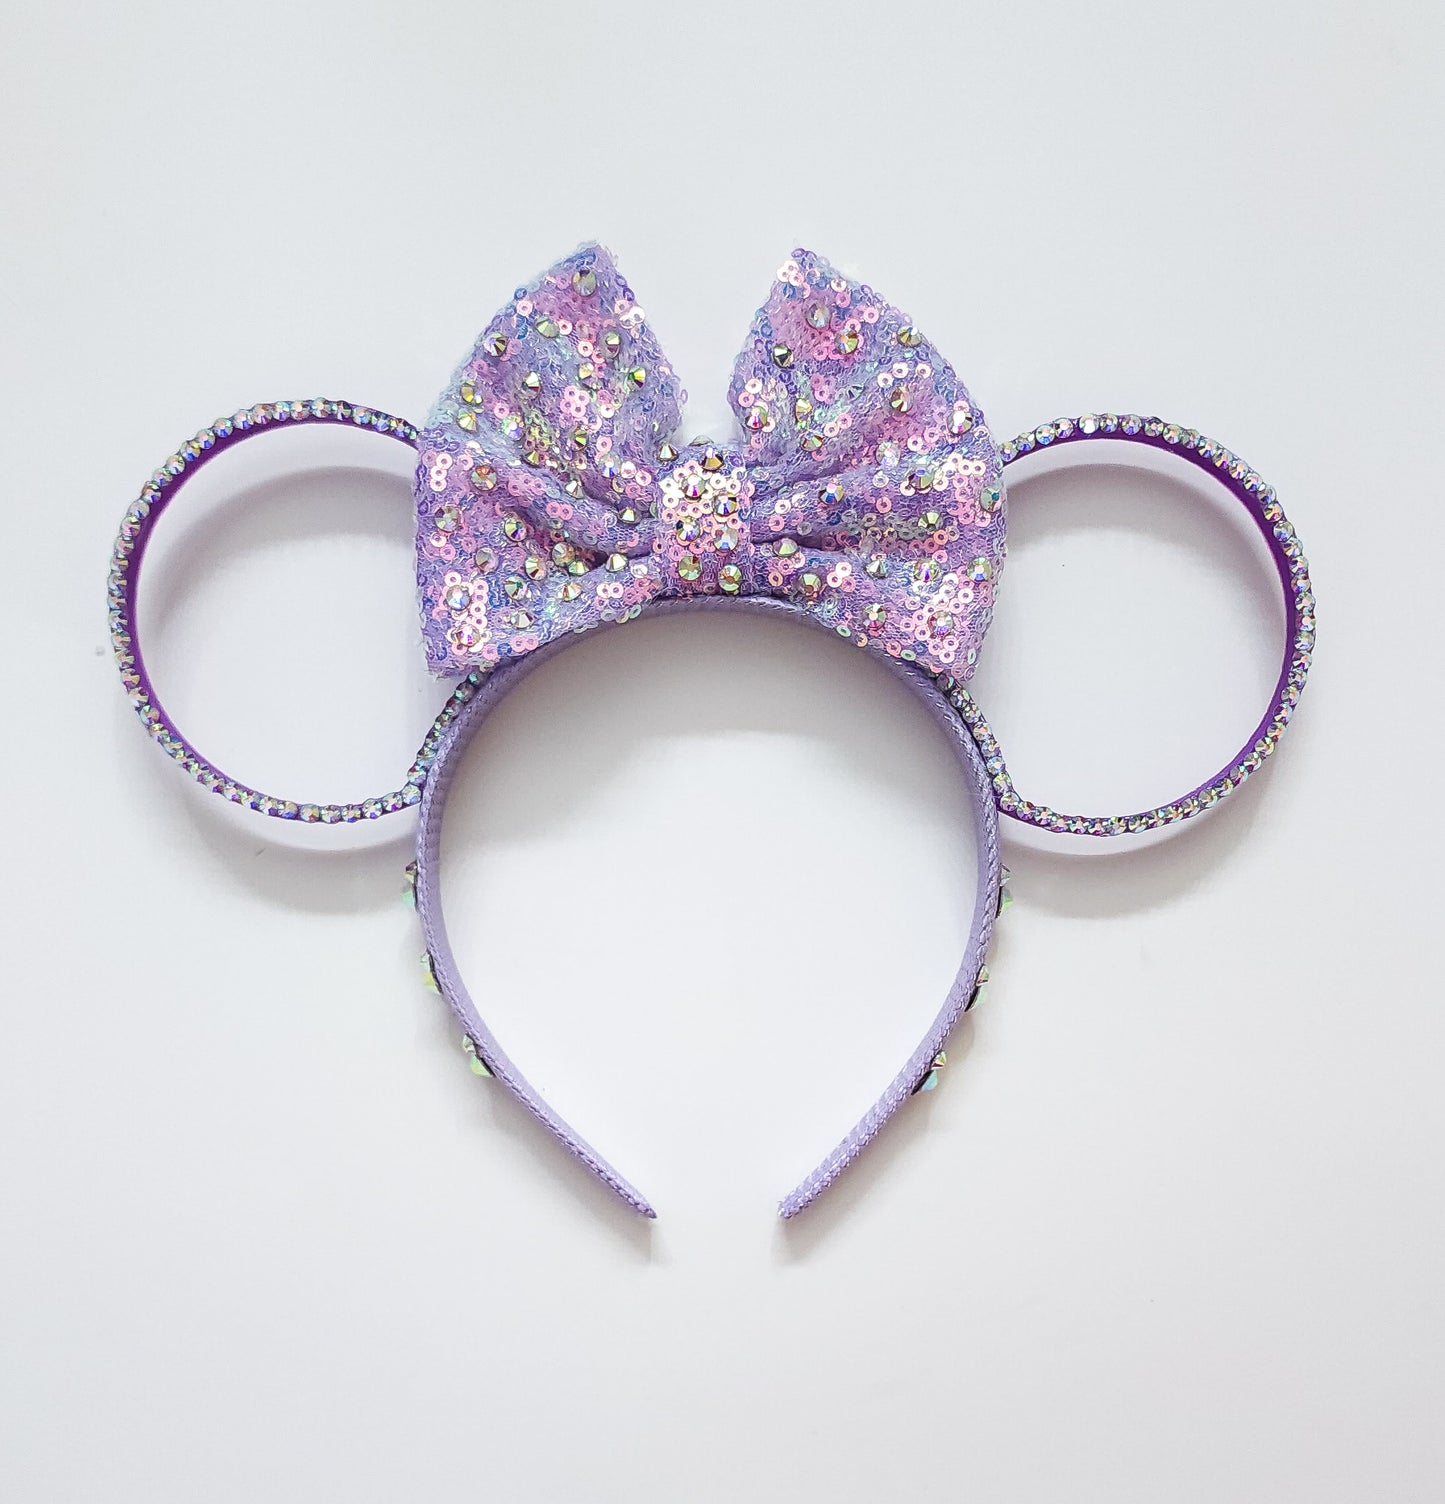 Child size 3d ears with rhinestones